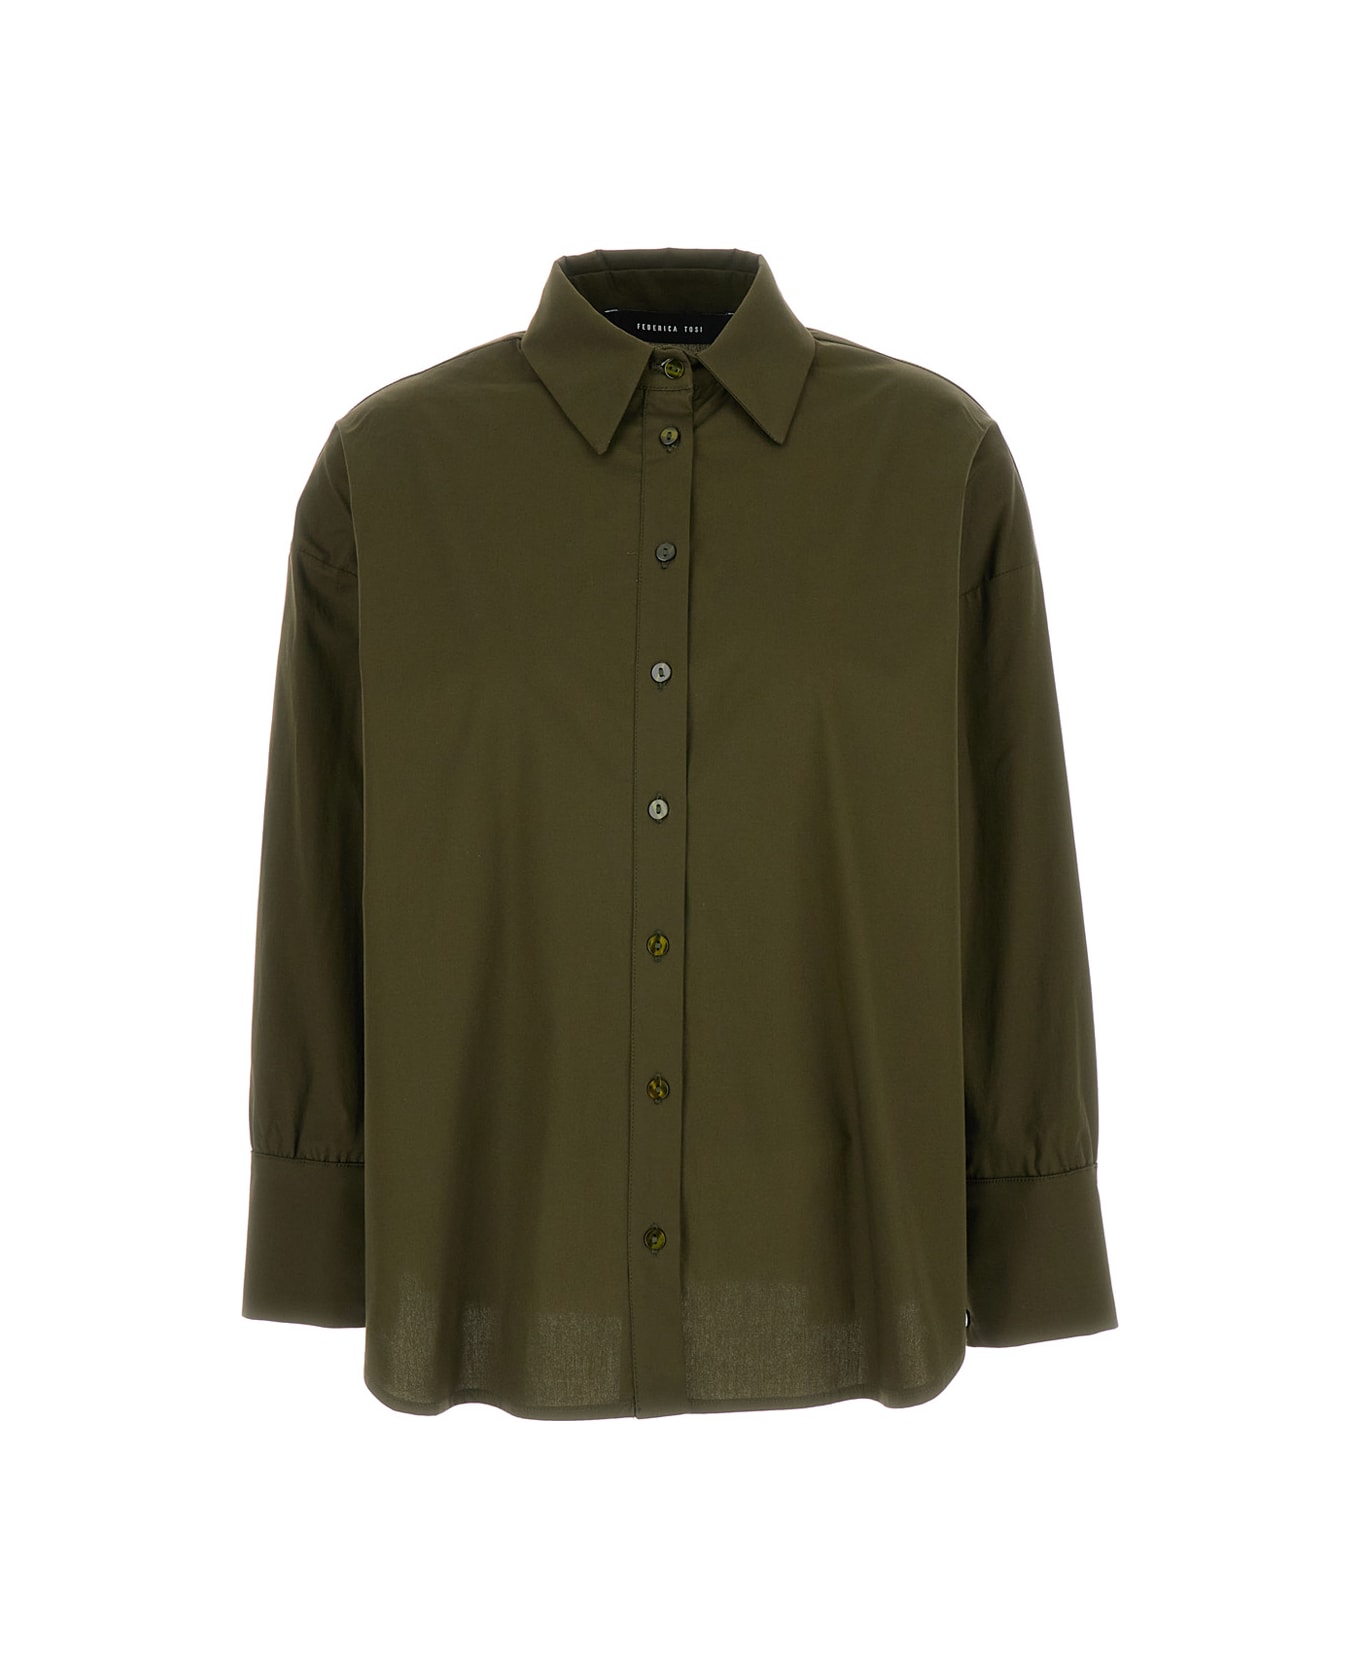 Federica Tosi Military Green Long Sleeves Shirt In Cotton Blend Woman - Green